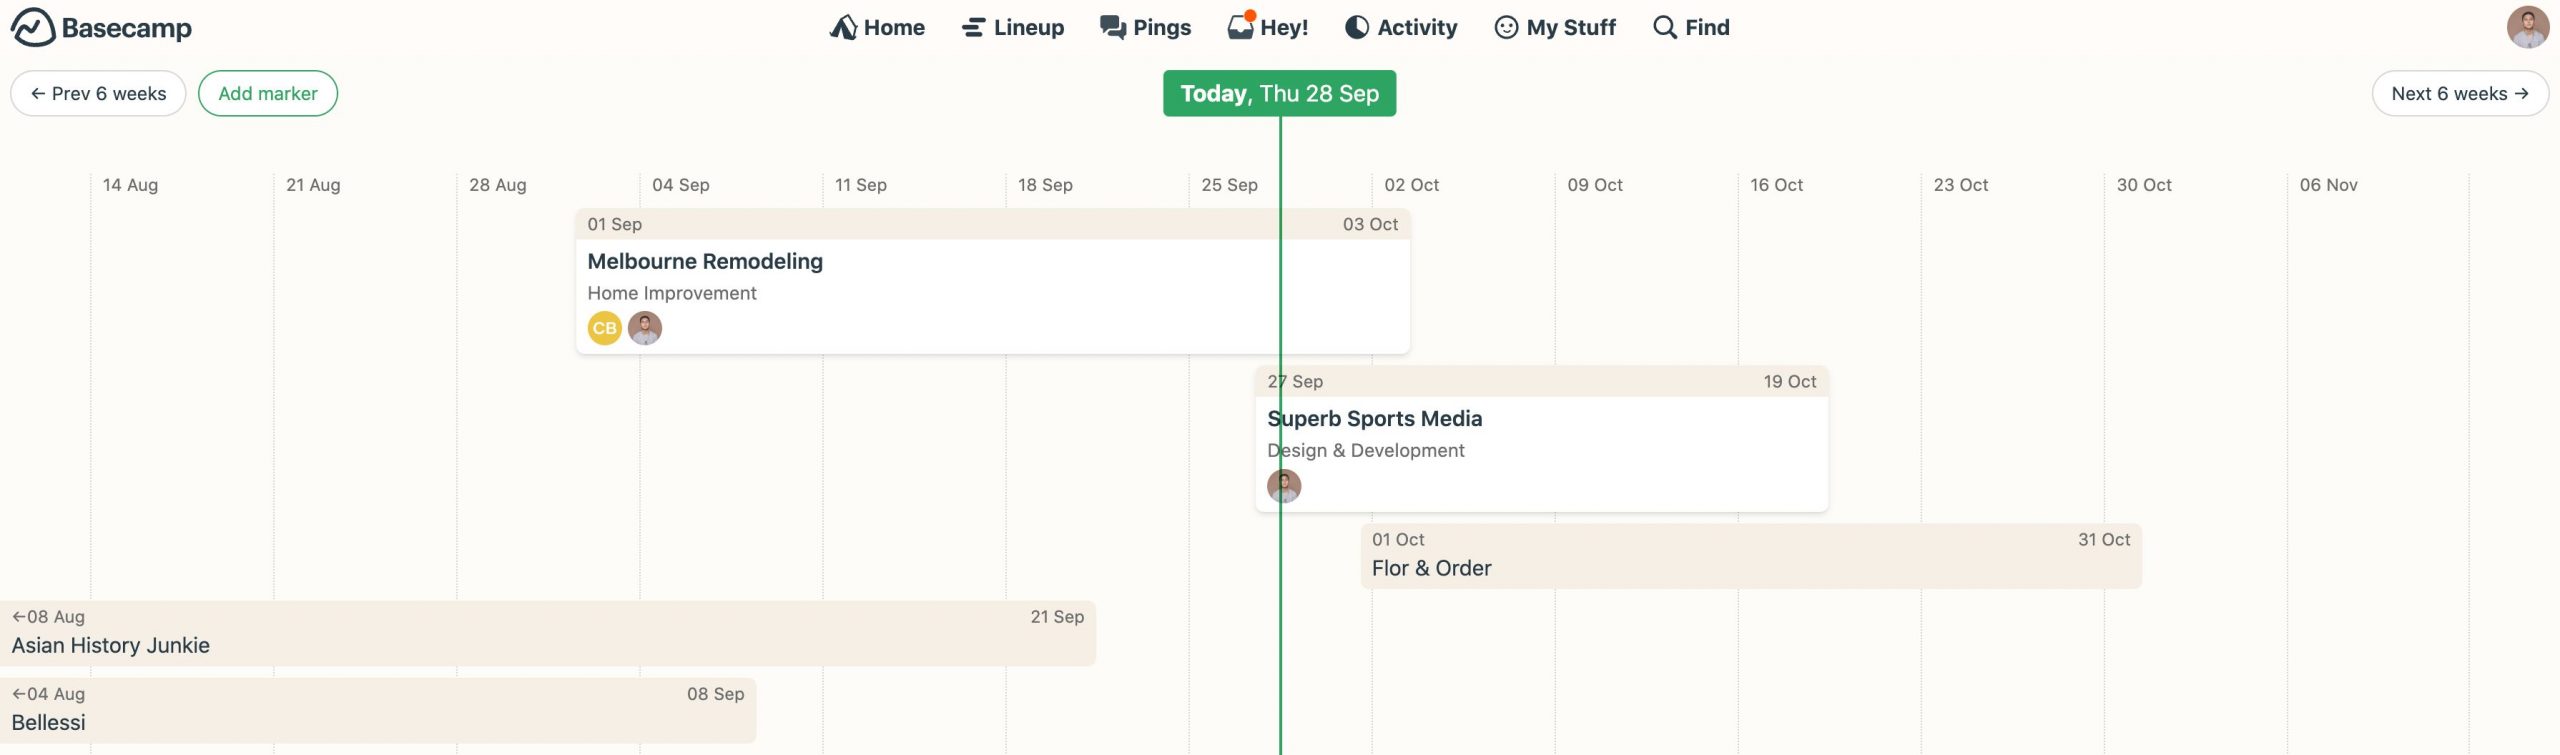 Image of Lineup page - a new feature of Basecamp project management tool